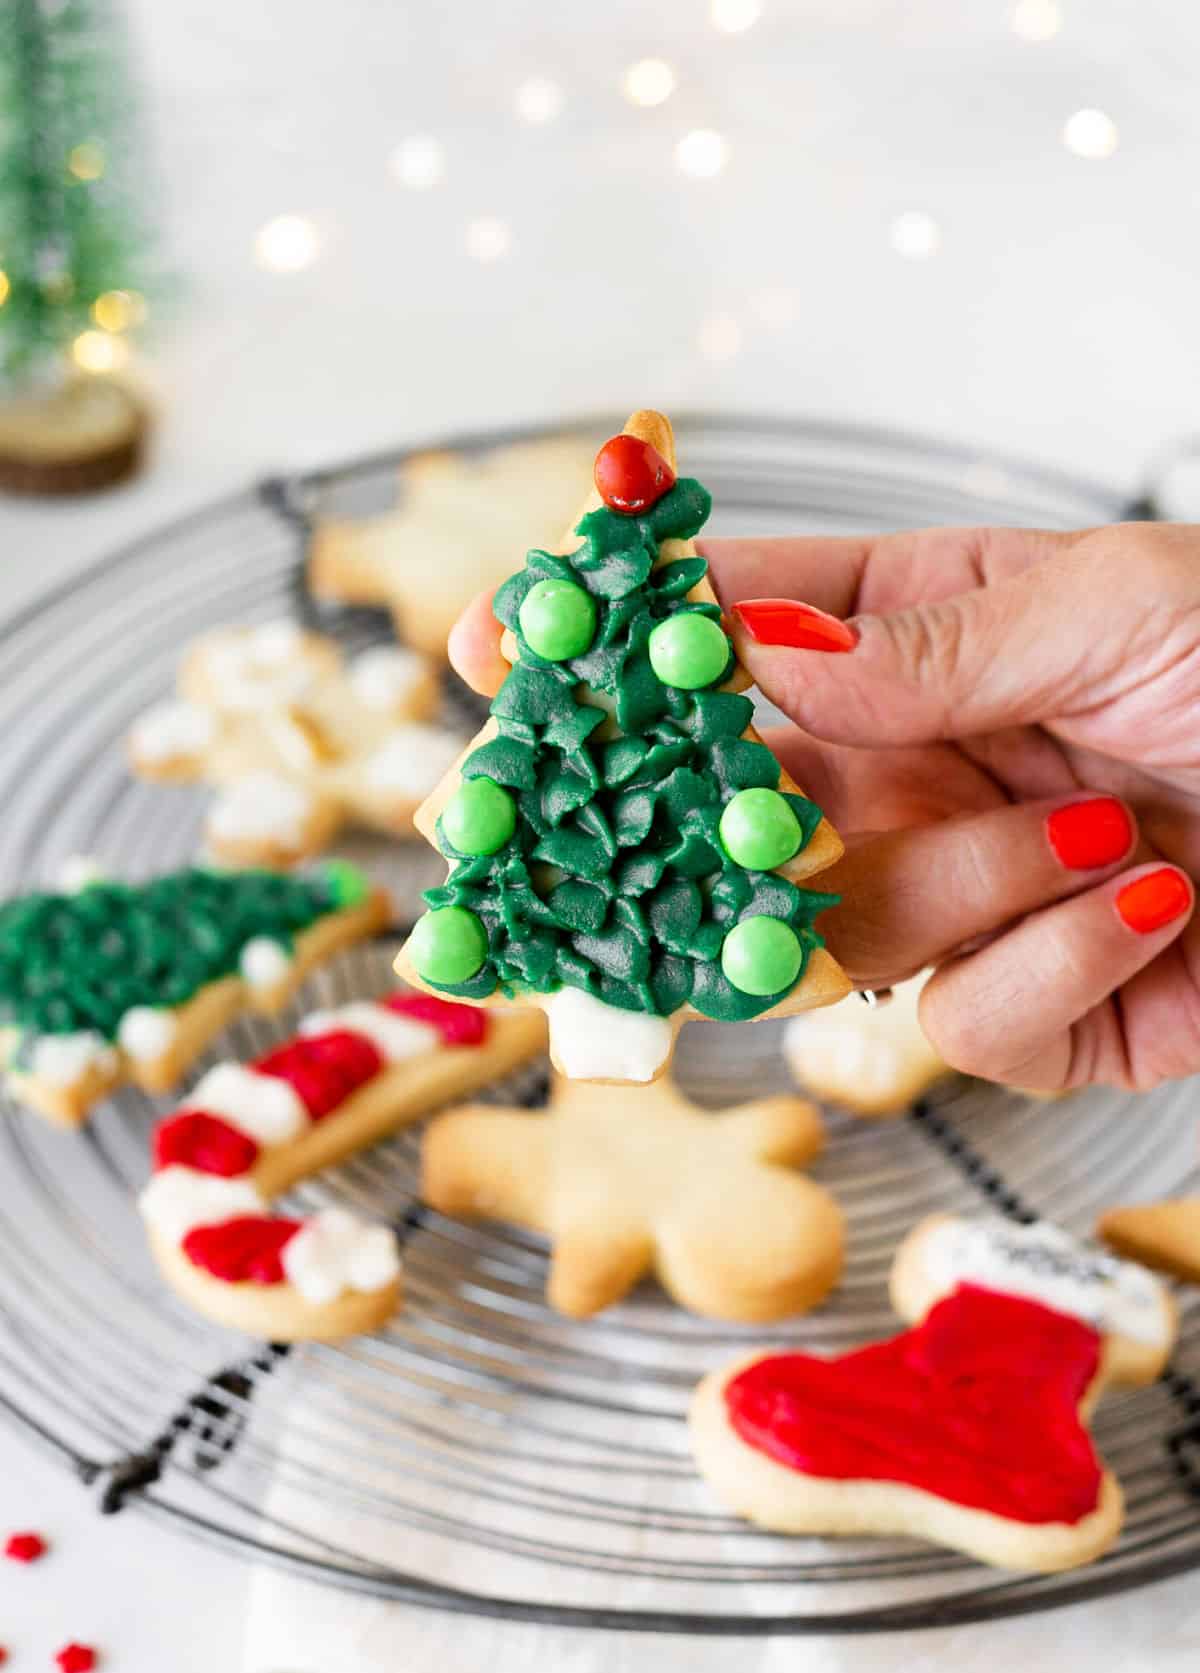 Holding a christmas tree decorated cut out cookie over wire rack with more cookies. White background with lights. 